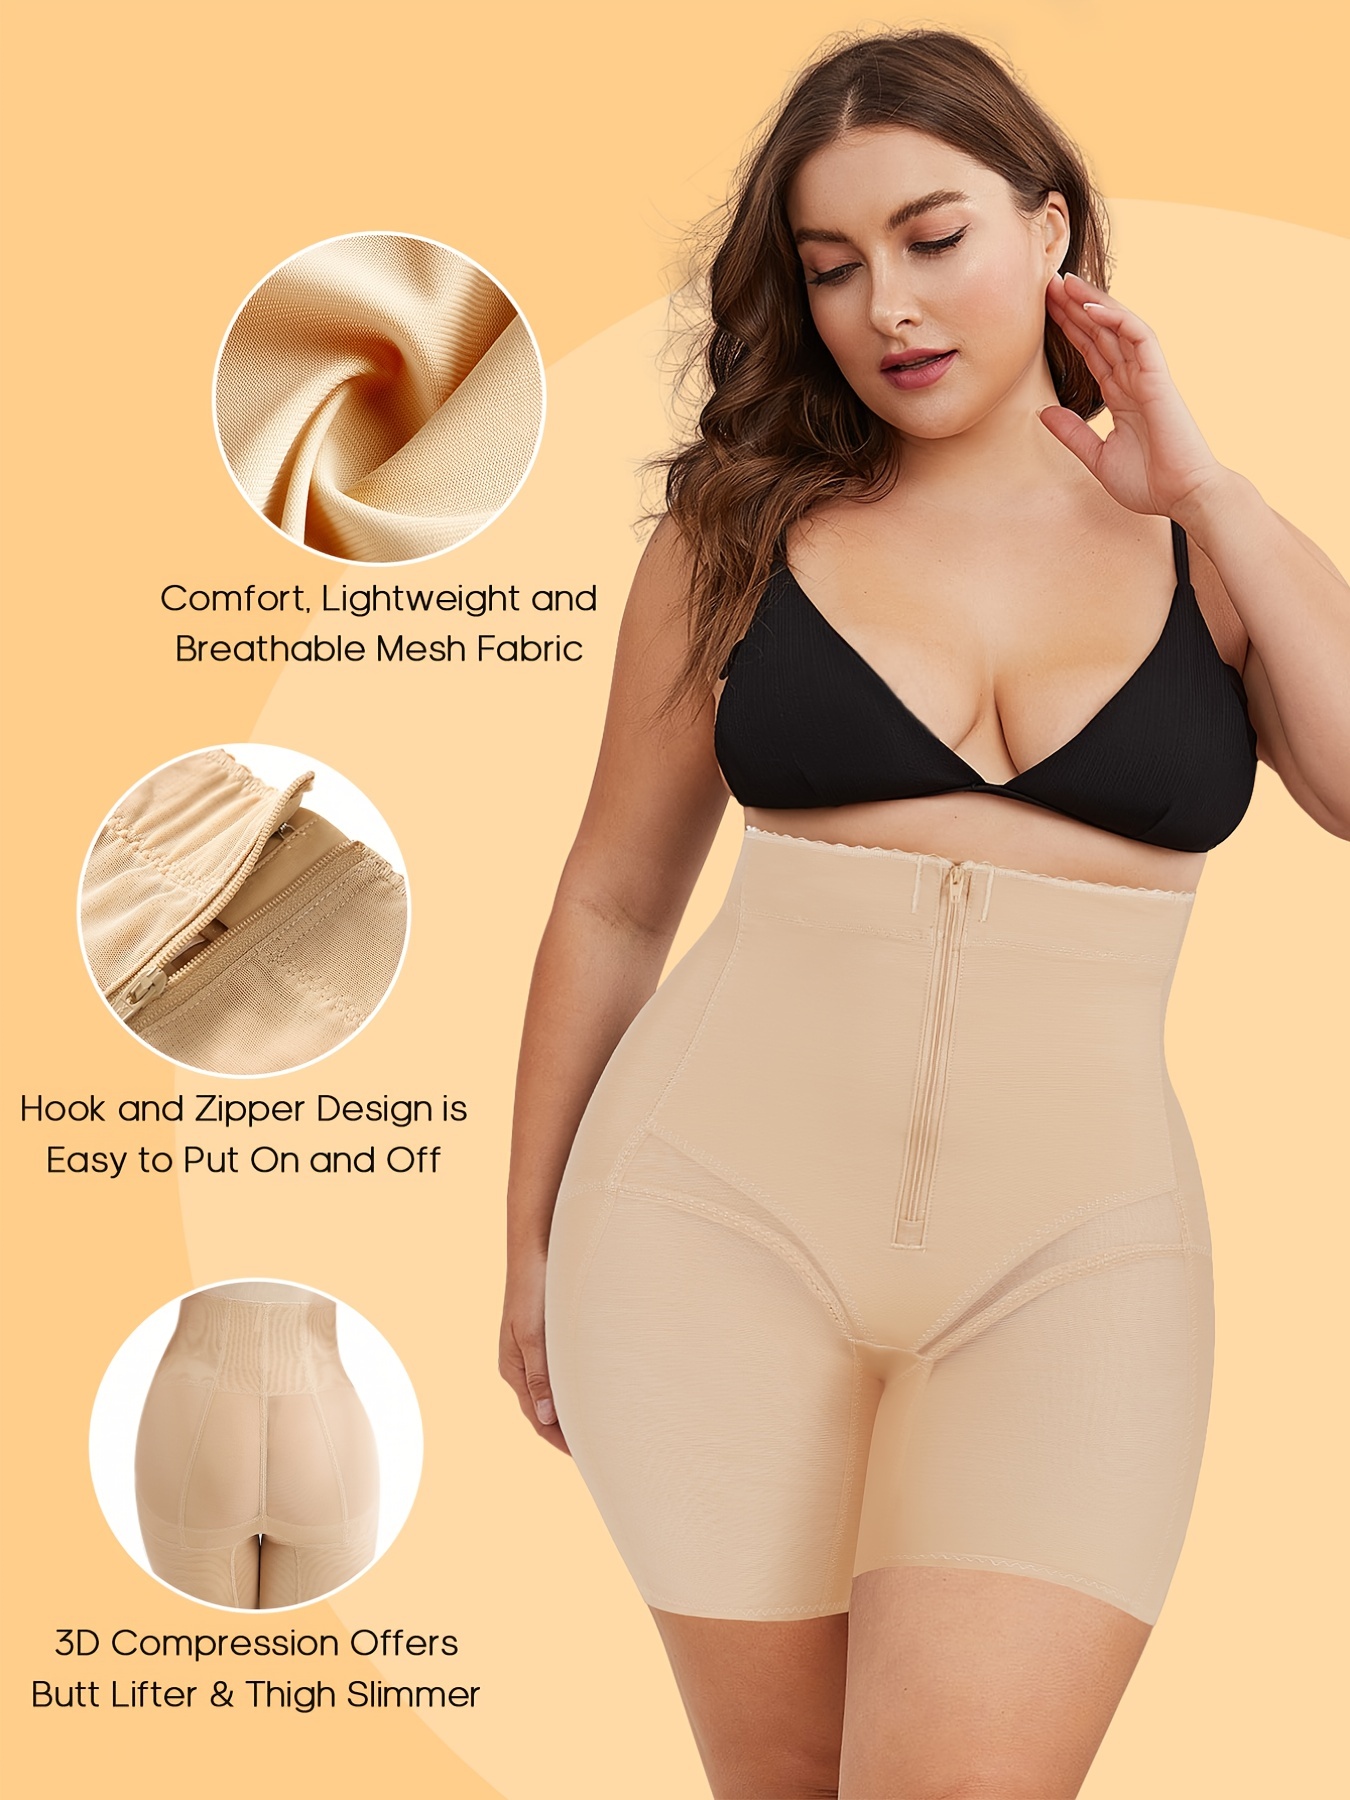 Women High Waist Shaping Panties Breathable Body Shaper Slimming Tummy  Underwear panty shapers